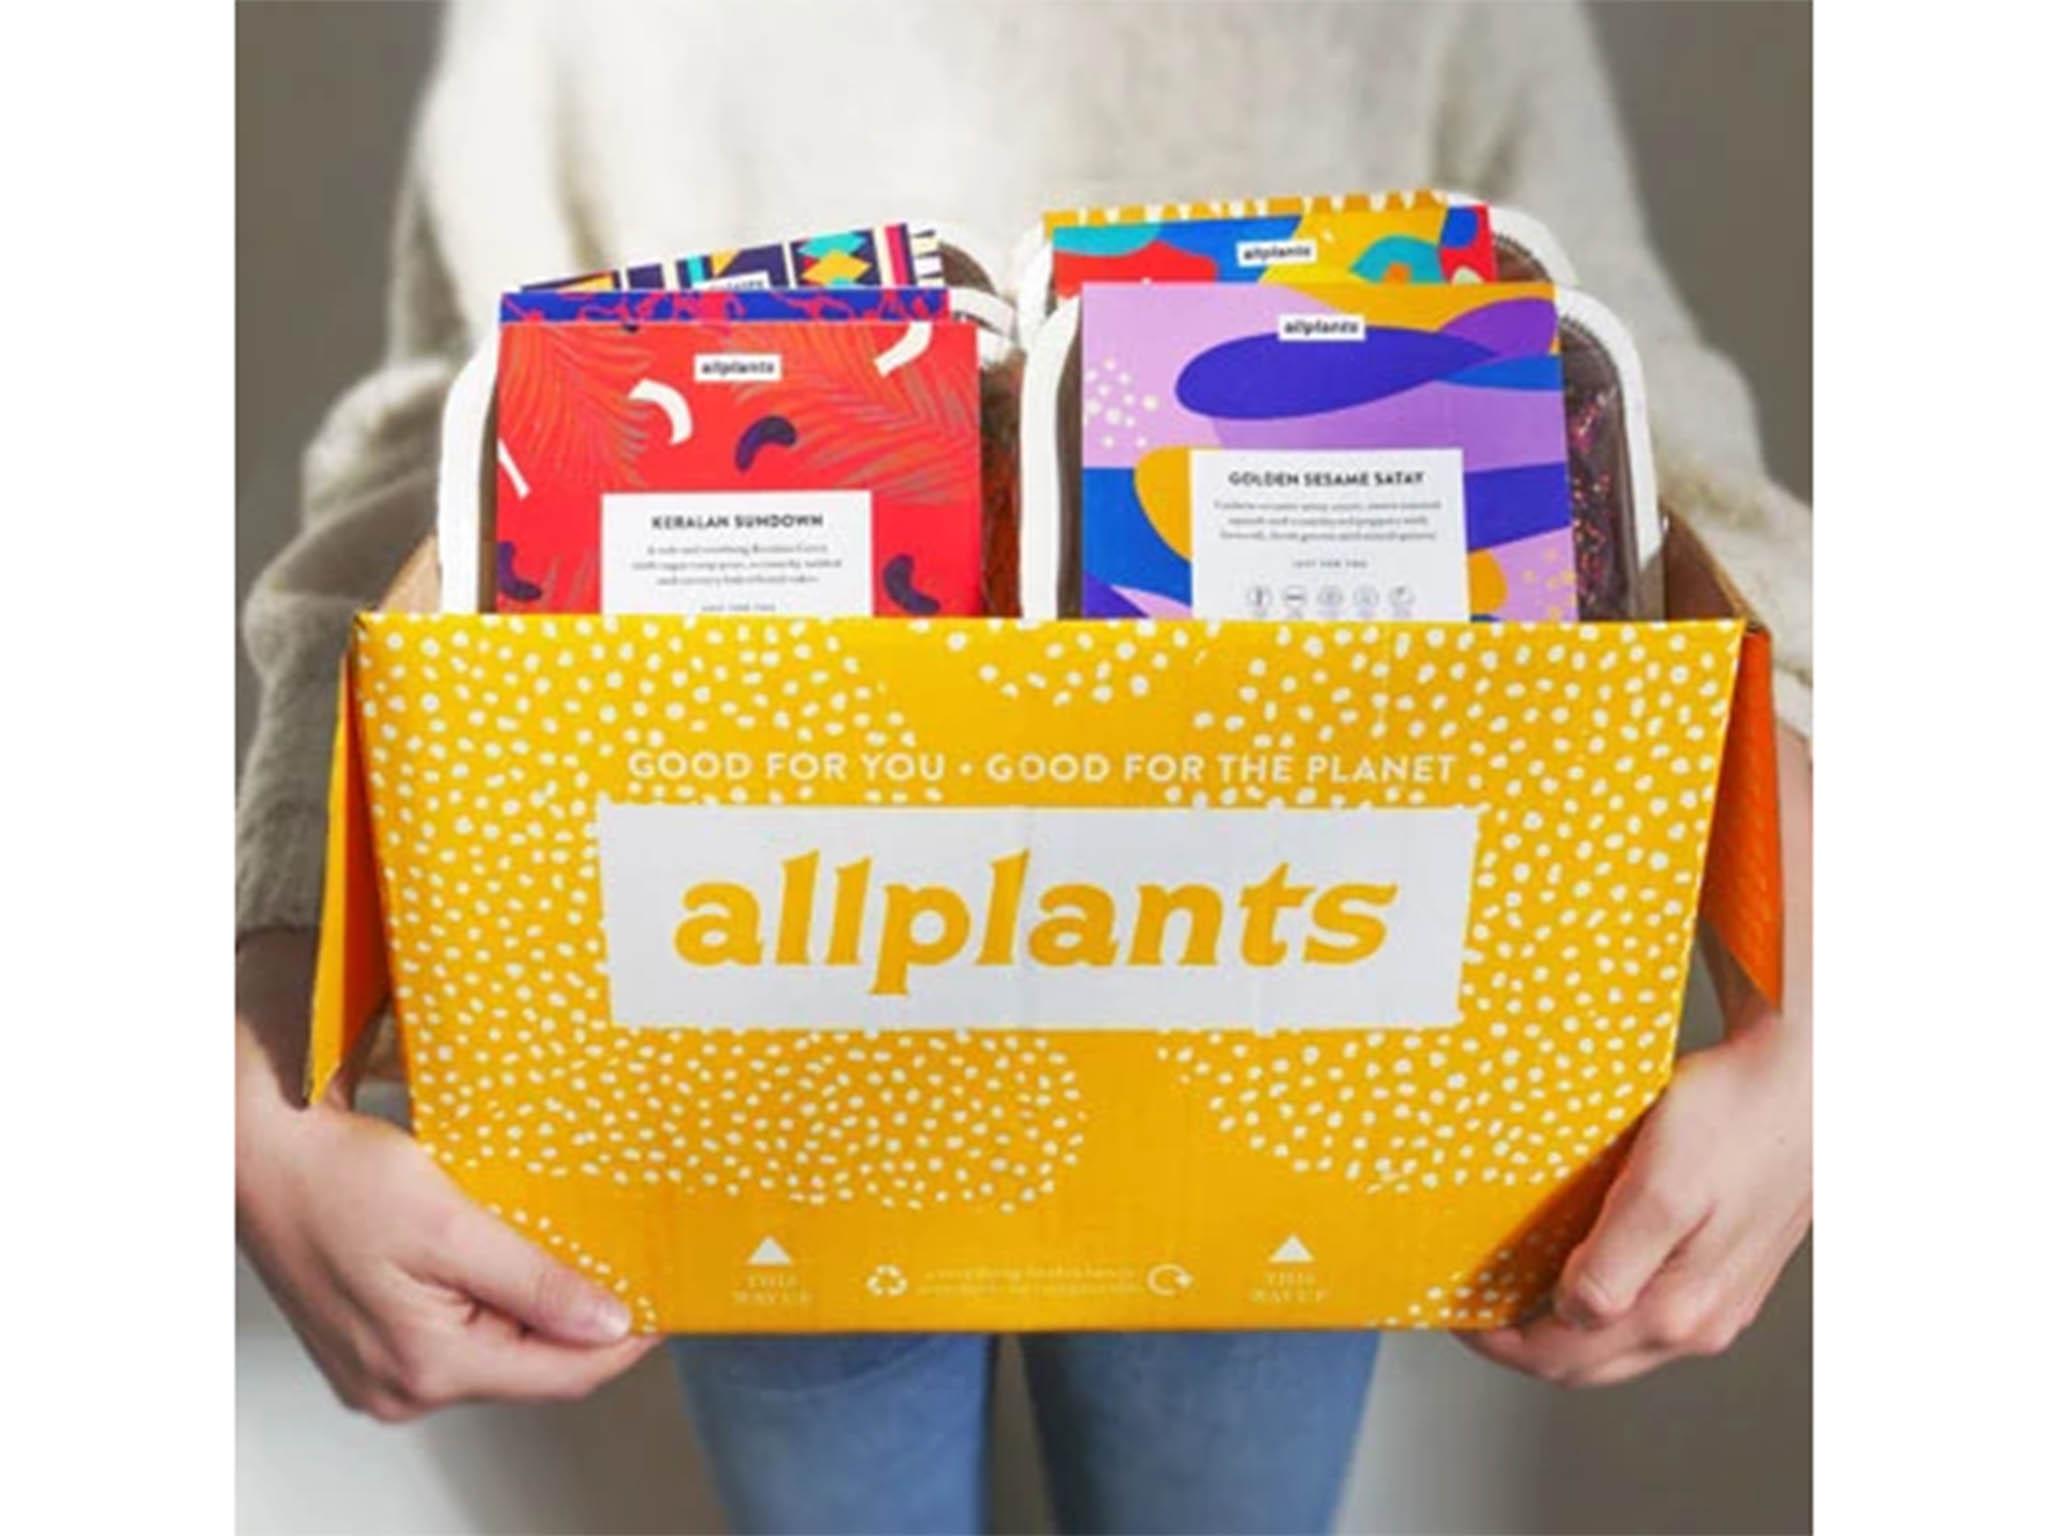 Allplants?announced that it had raised ?3.4m through crowdfunding in March, days before restaurants were told to close